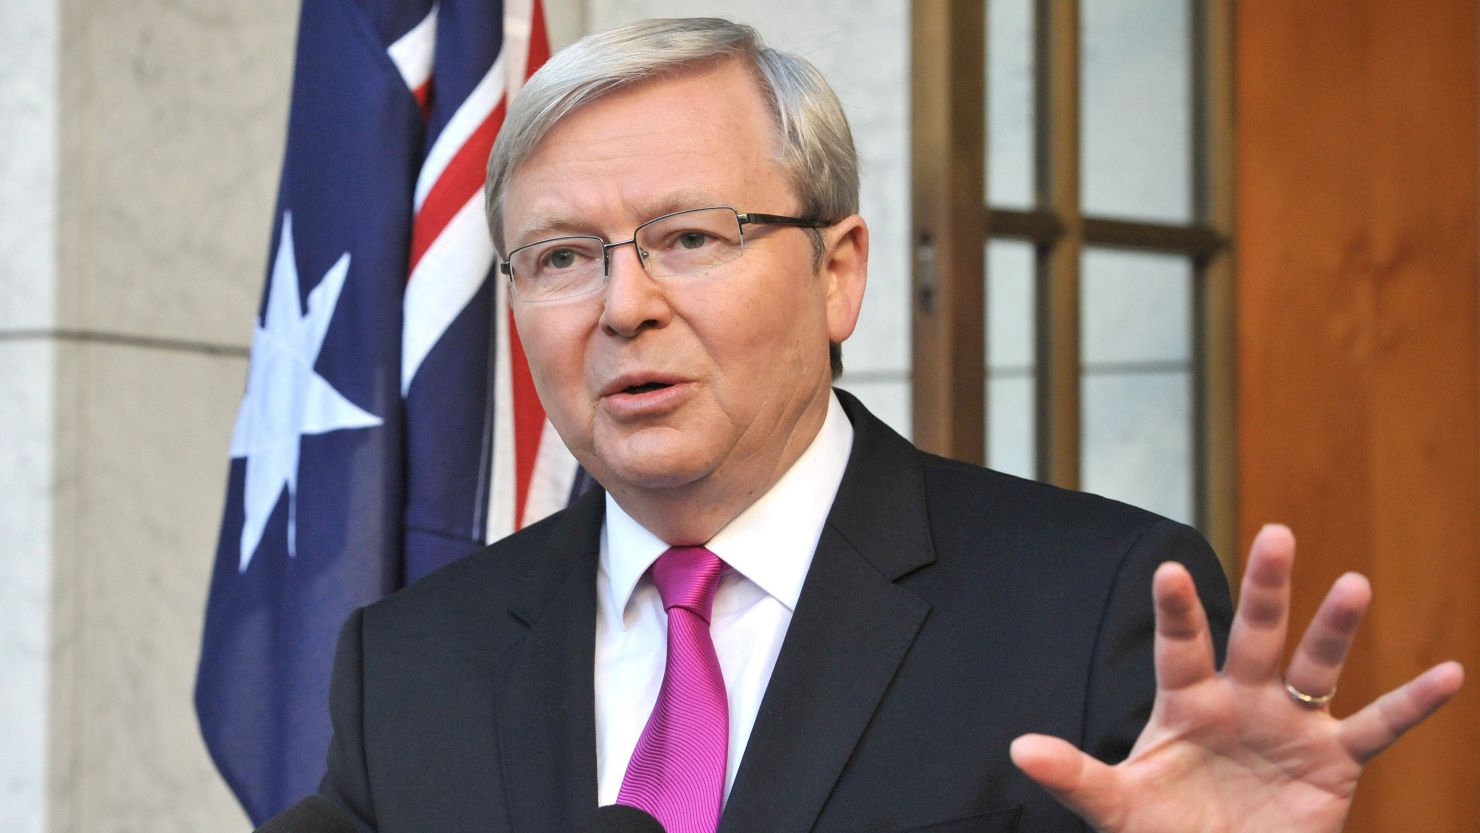 August 4, Australia's Prime Minister Kevin Rudd addresses the media after calling a general election for September 7.